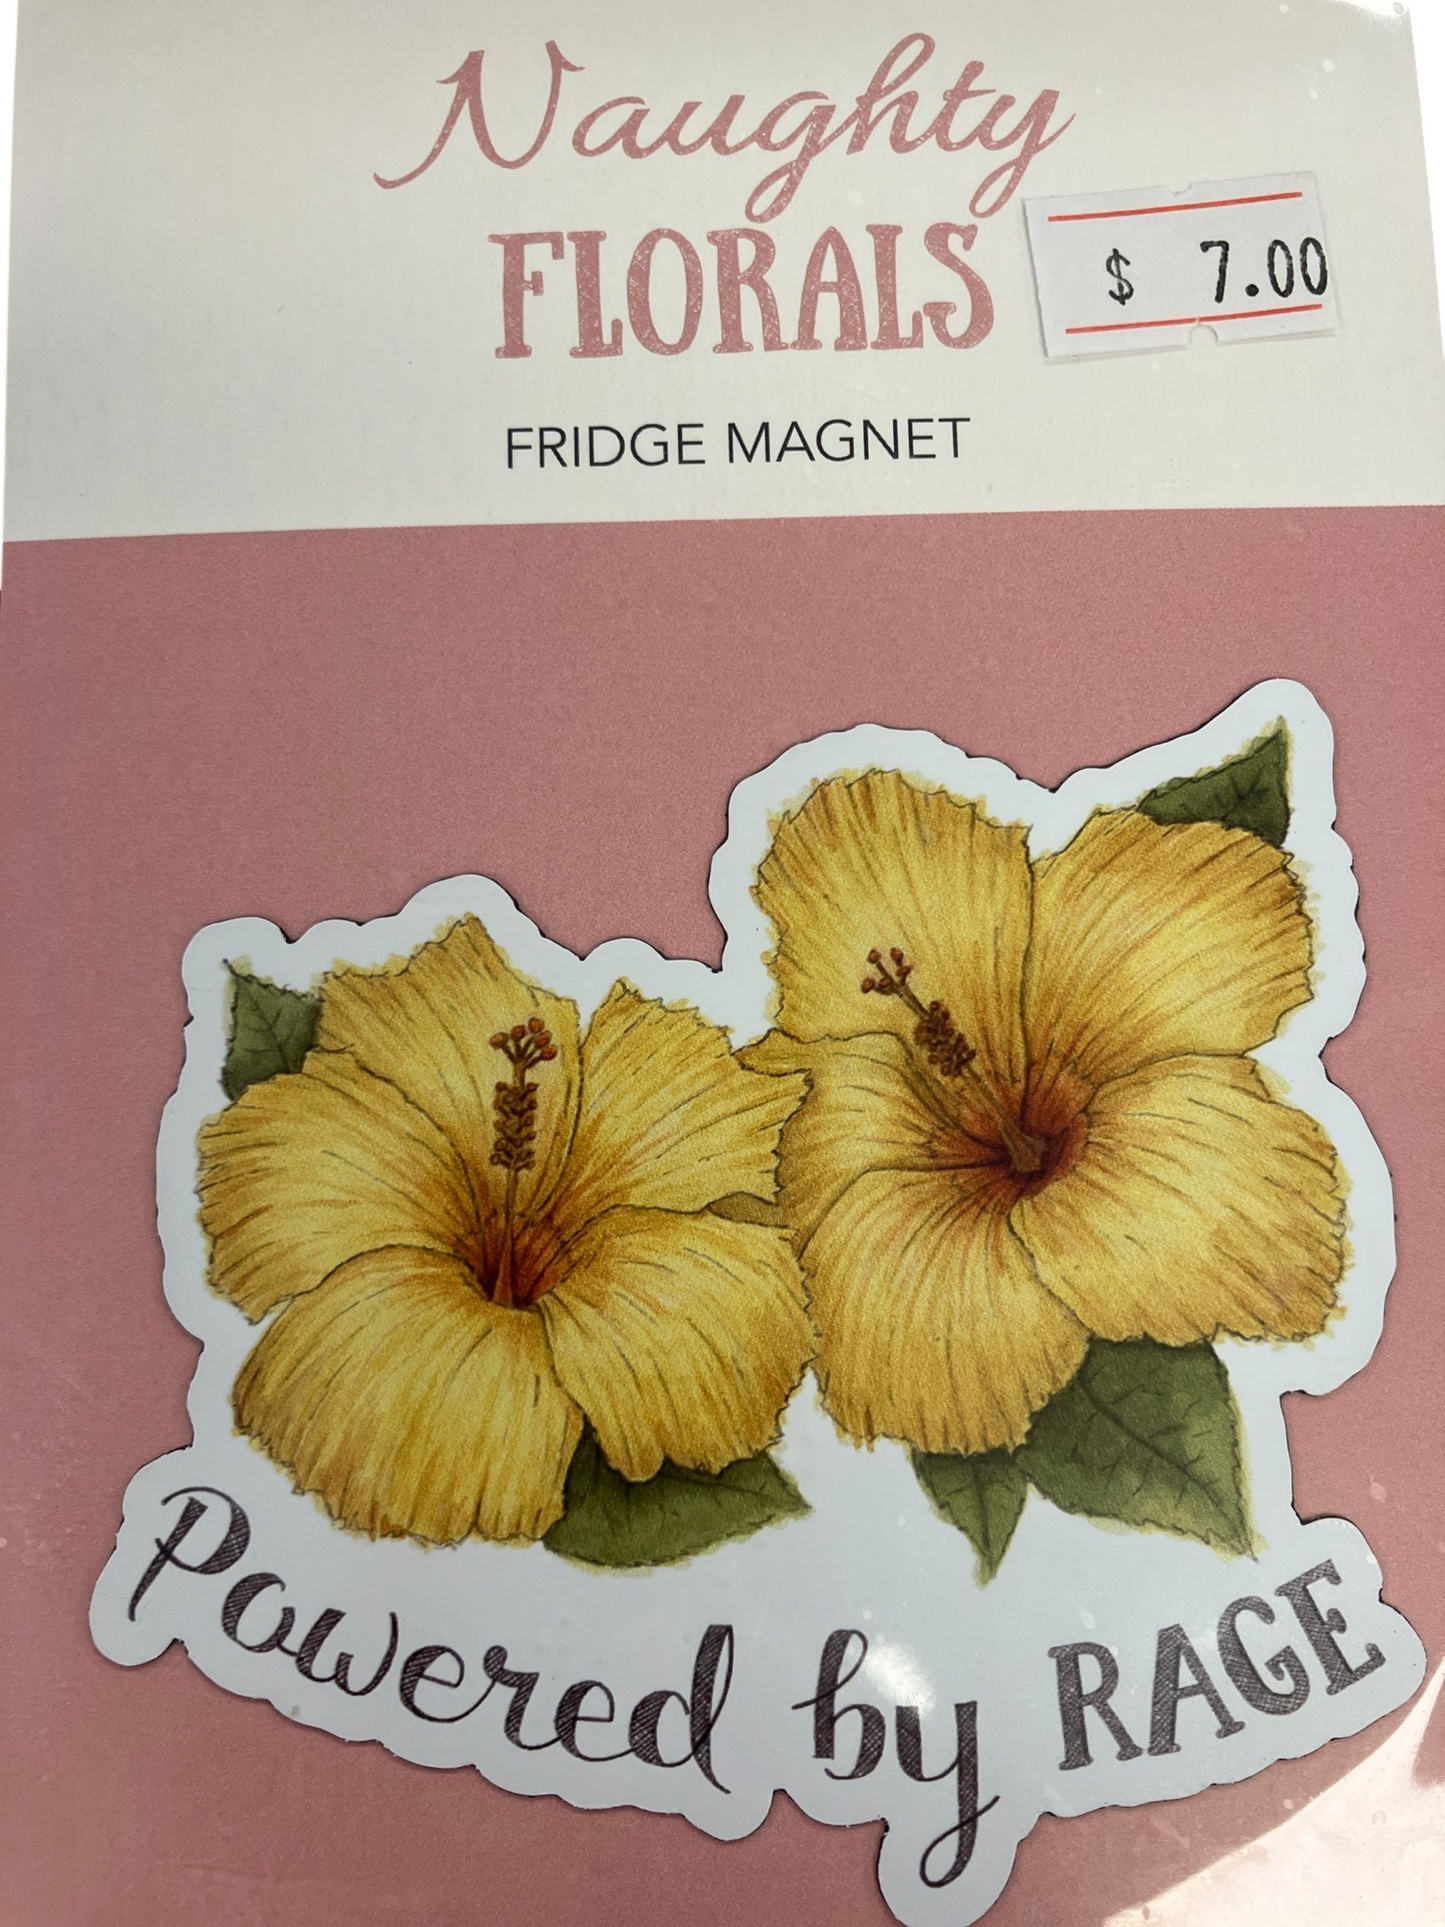 Naughty Florals - Powered by Rage - Magnet